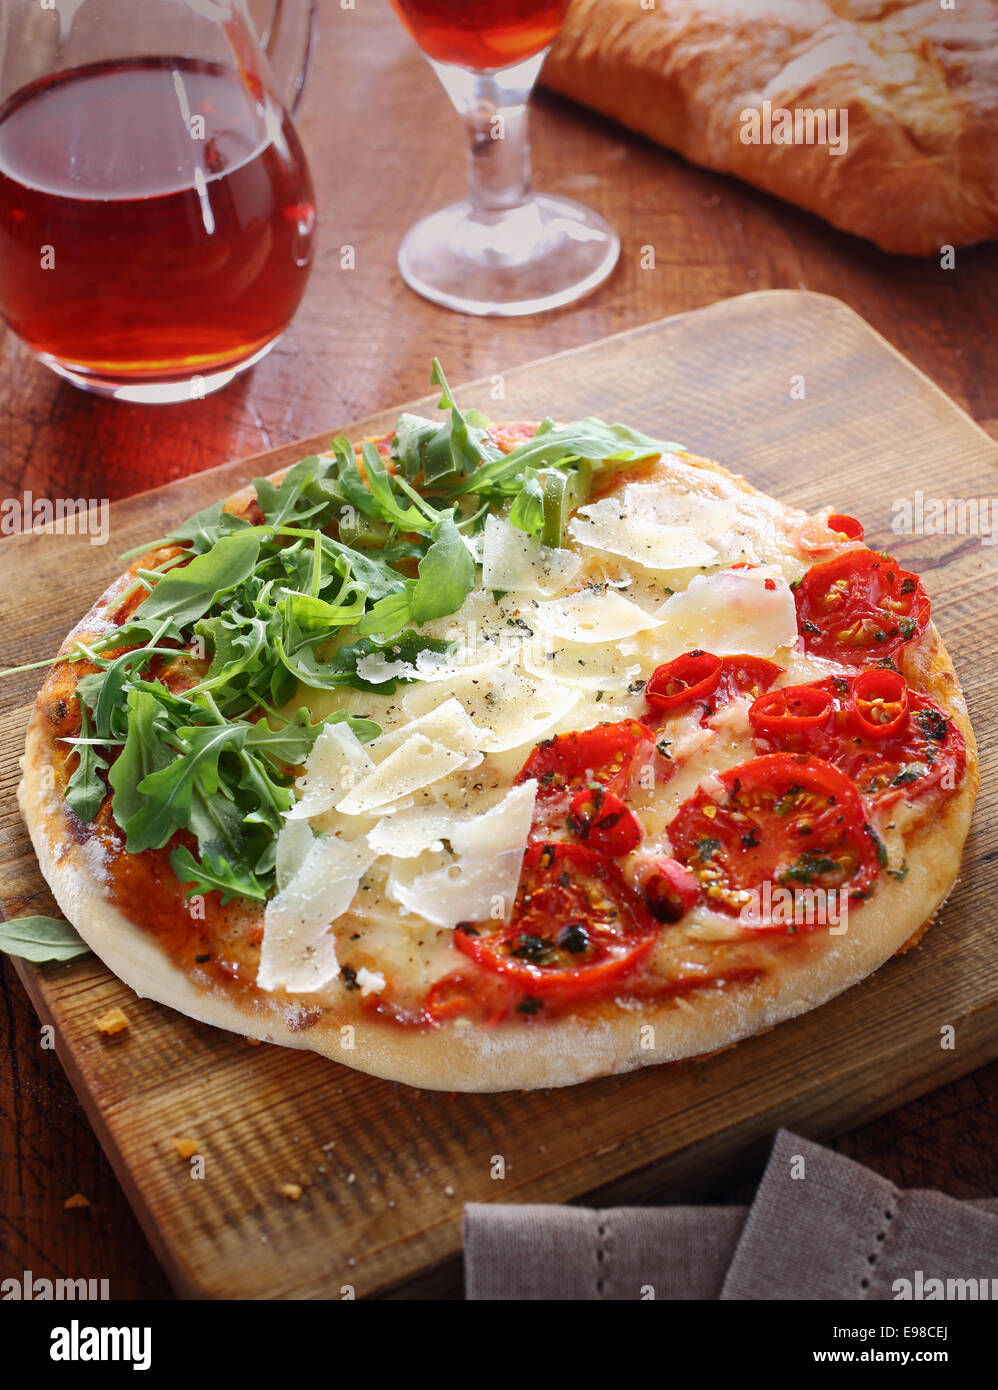 Italian pizza in the red, white and green colours of the national flag formed by the three toppings of tomatoes, cheese shavings and fresh rocket leaves on a wooden board served with a light red wine Stock Photo